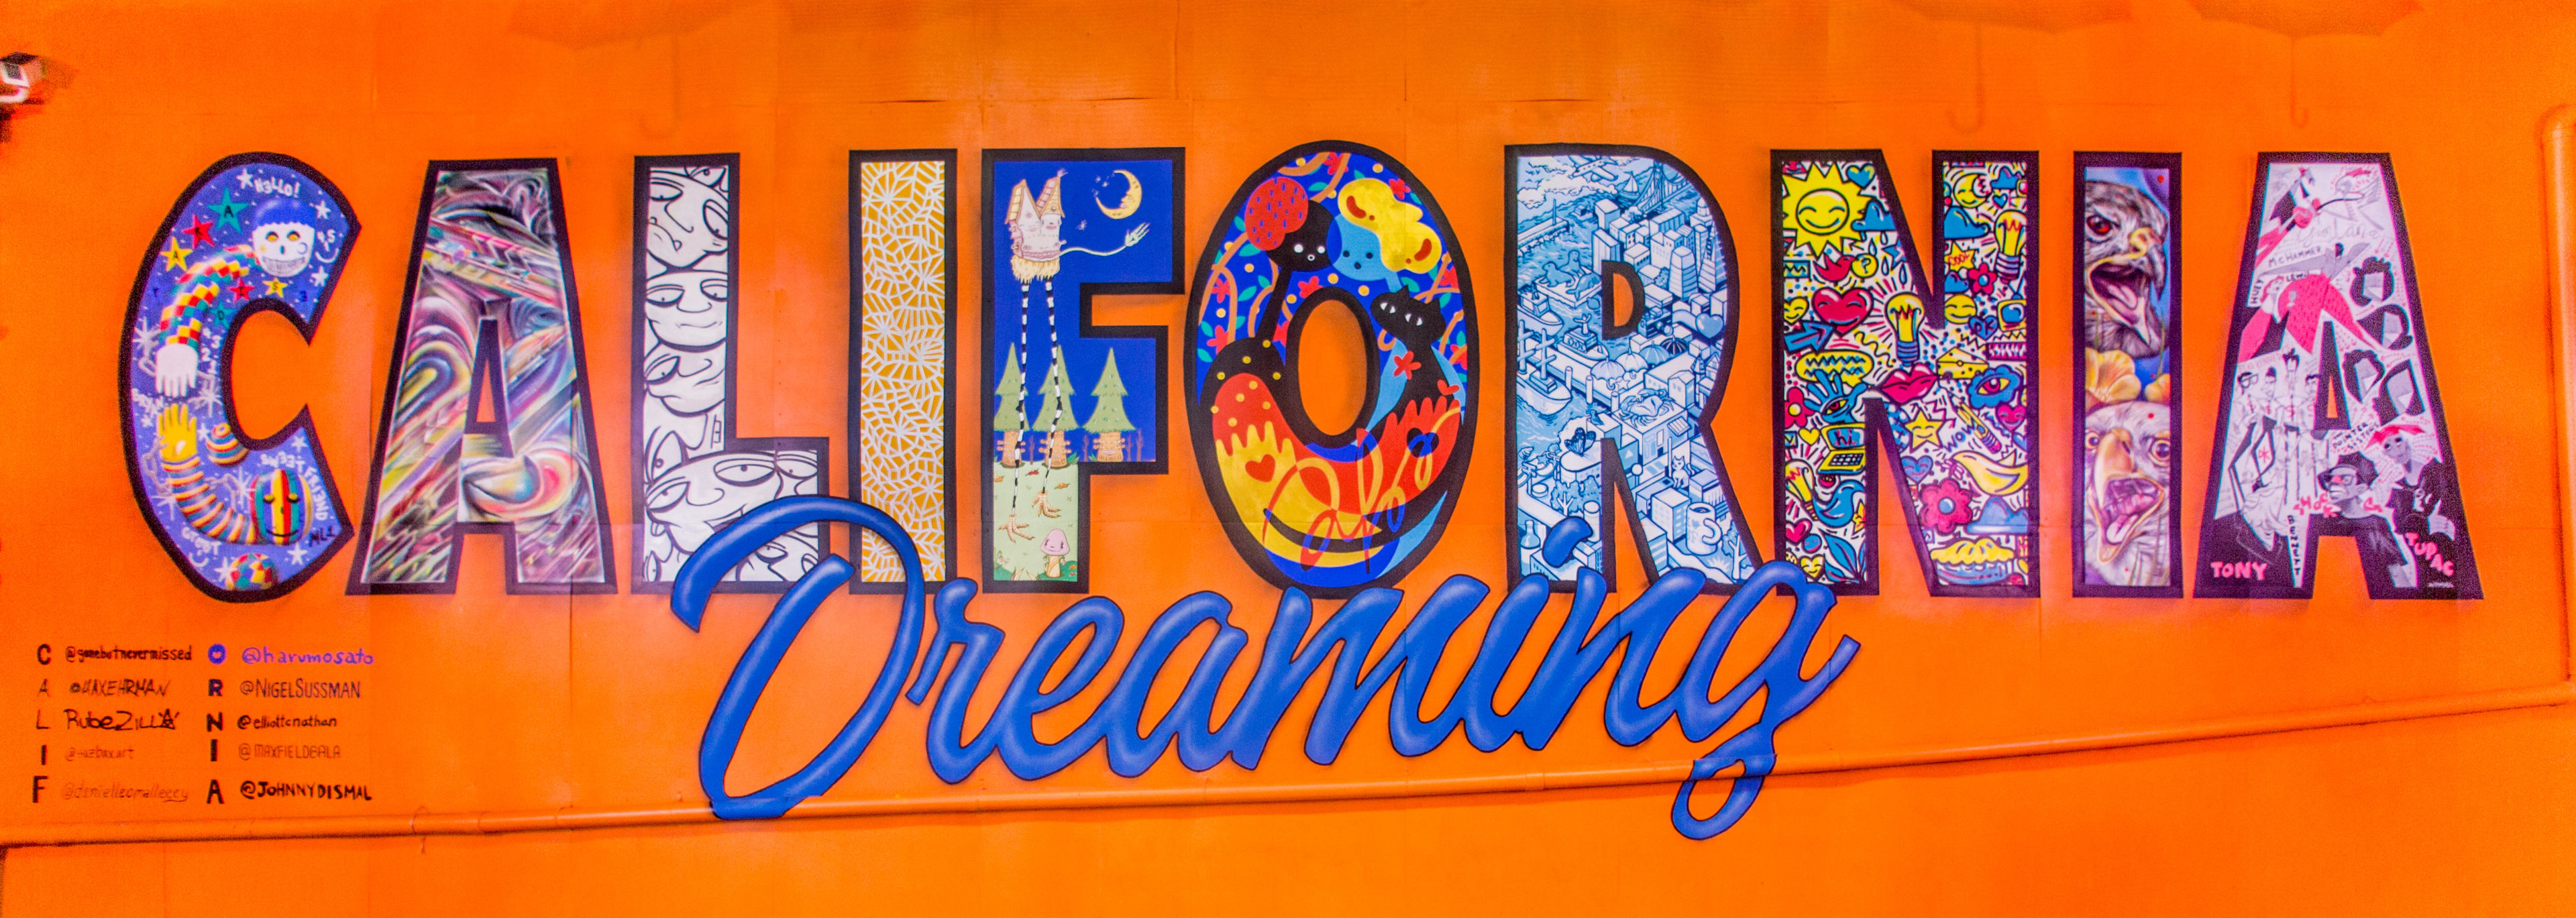 A colorful mural saying "California Dreaming" in the Umbrella Alley, Oakland, CA